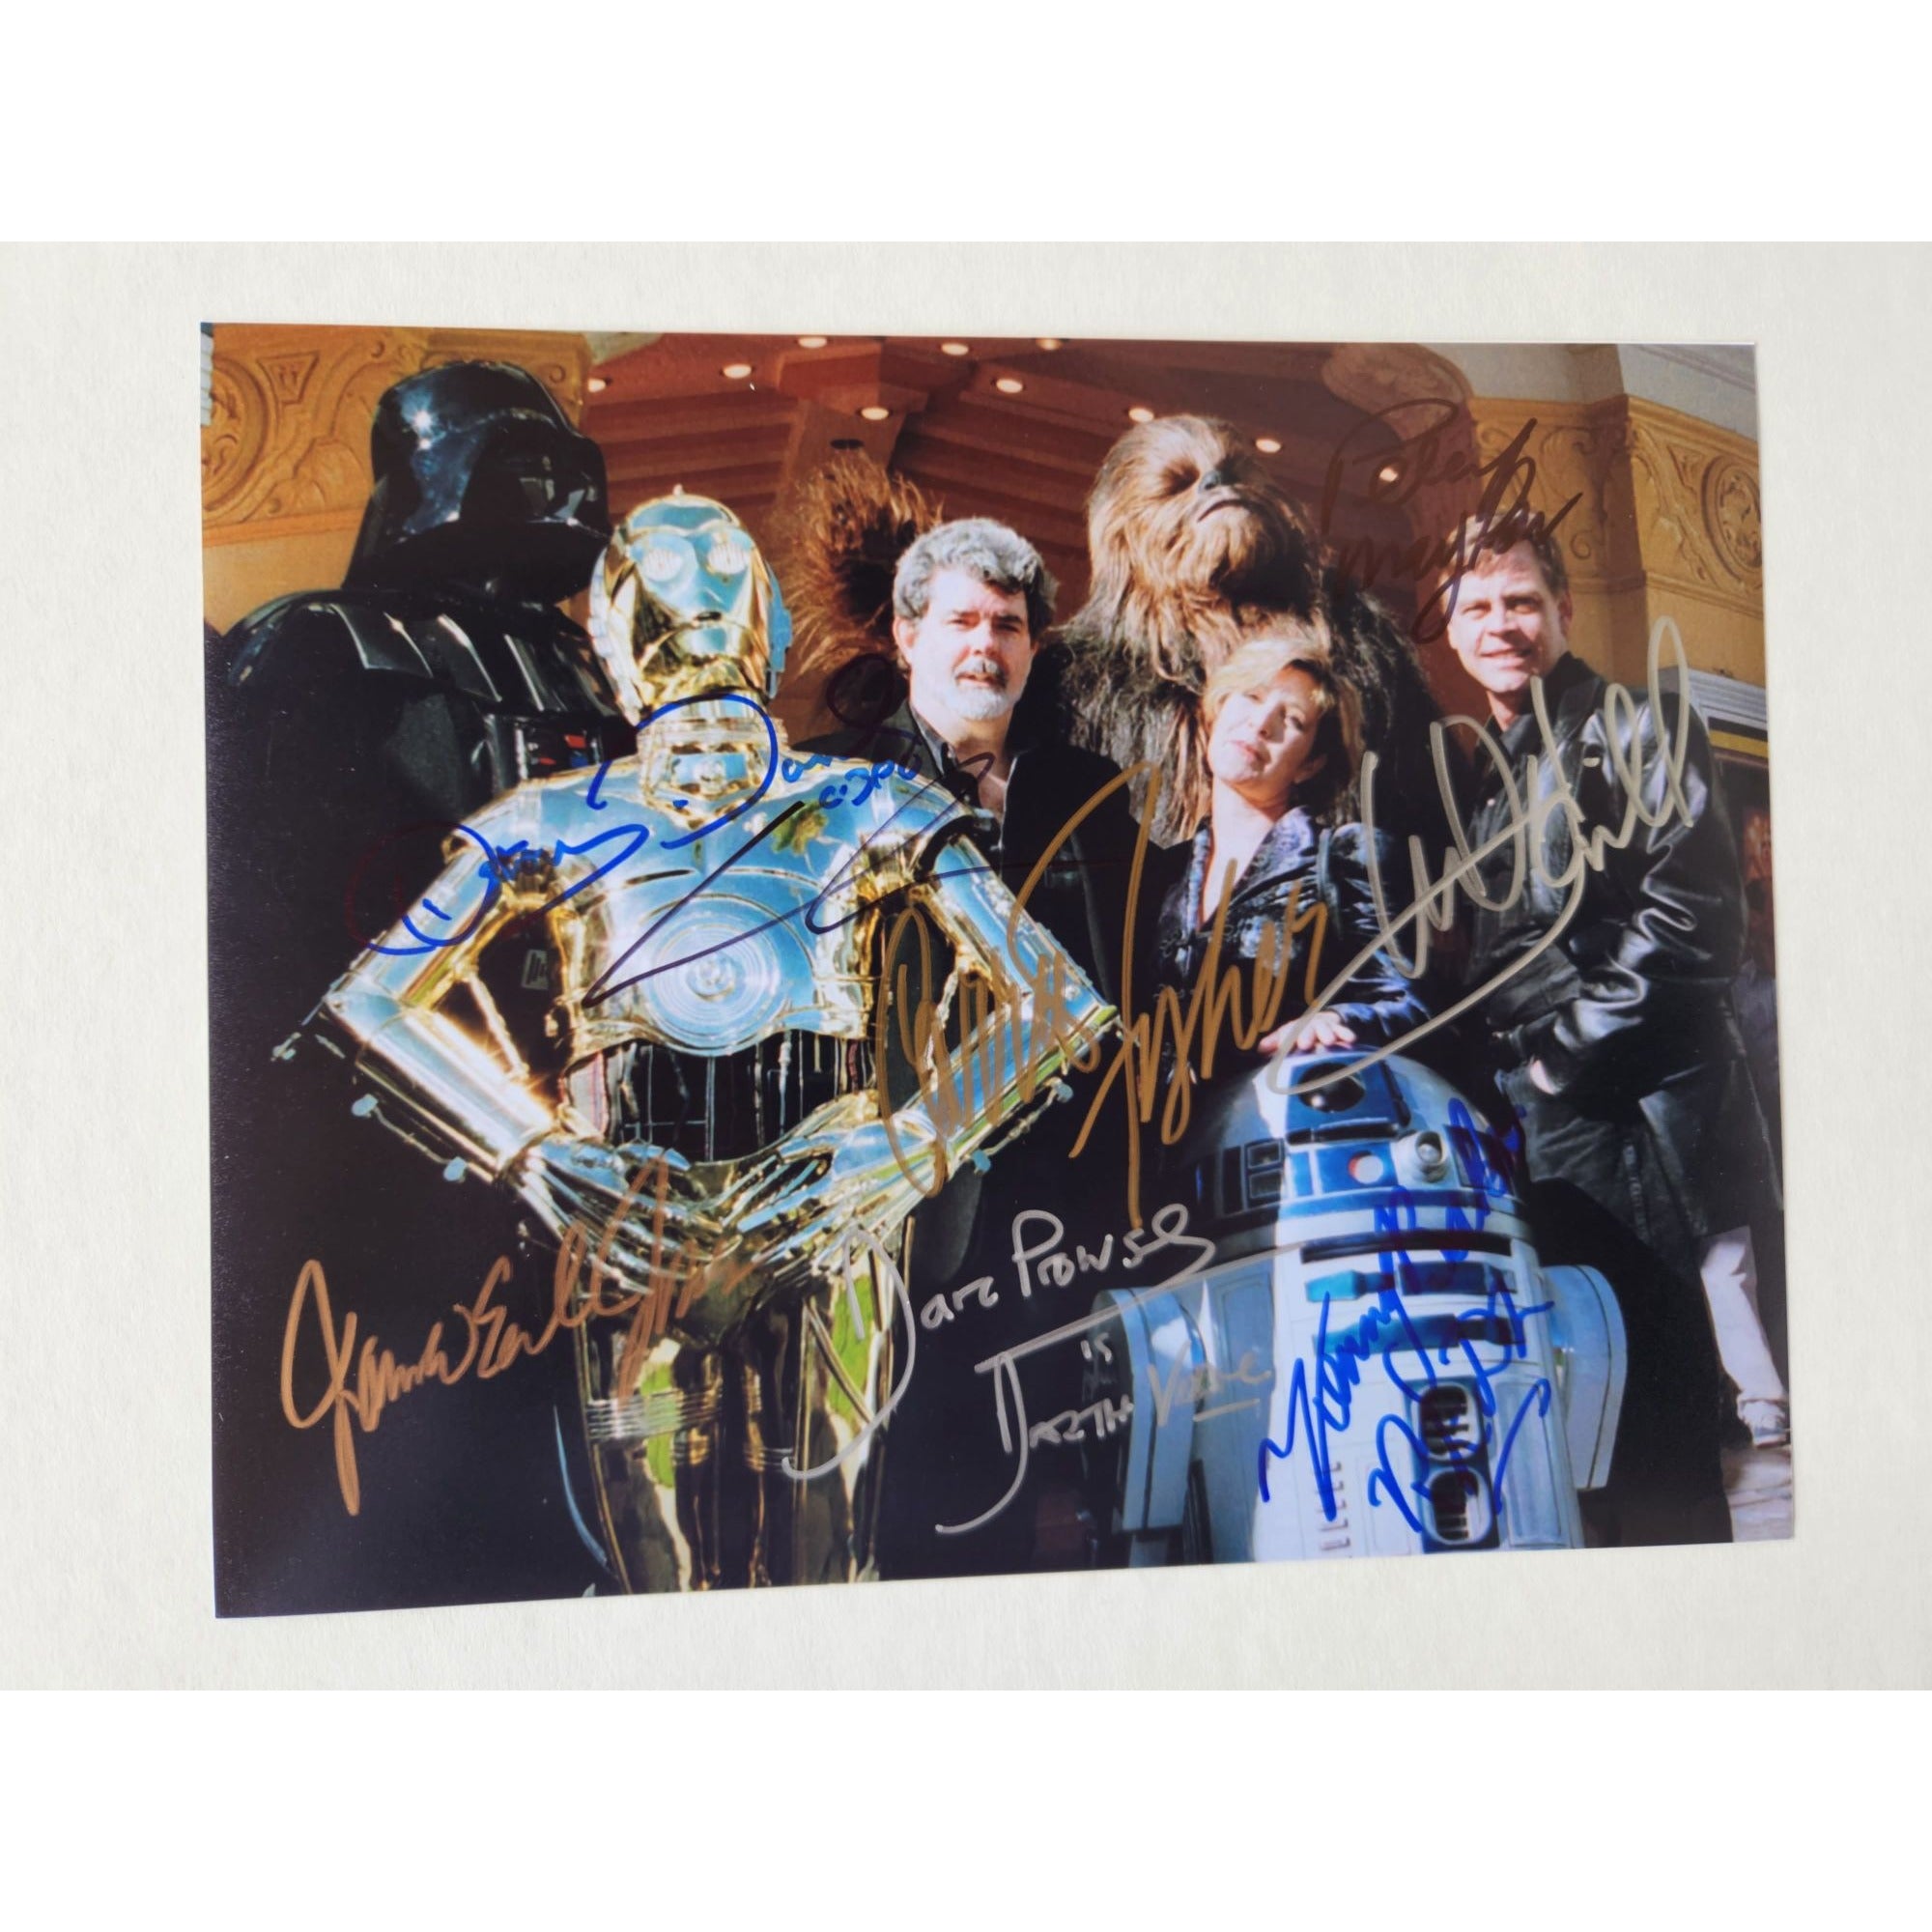 Star Wars James Earl Jones George Lucas Carrie Fisher Mark Hamill Kenny Baker David Prowse photo signed with proof